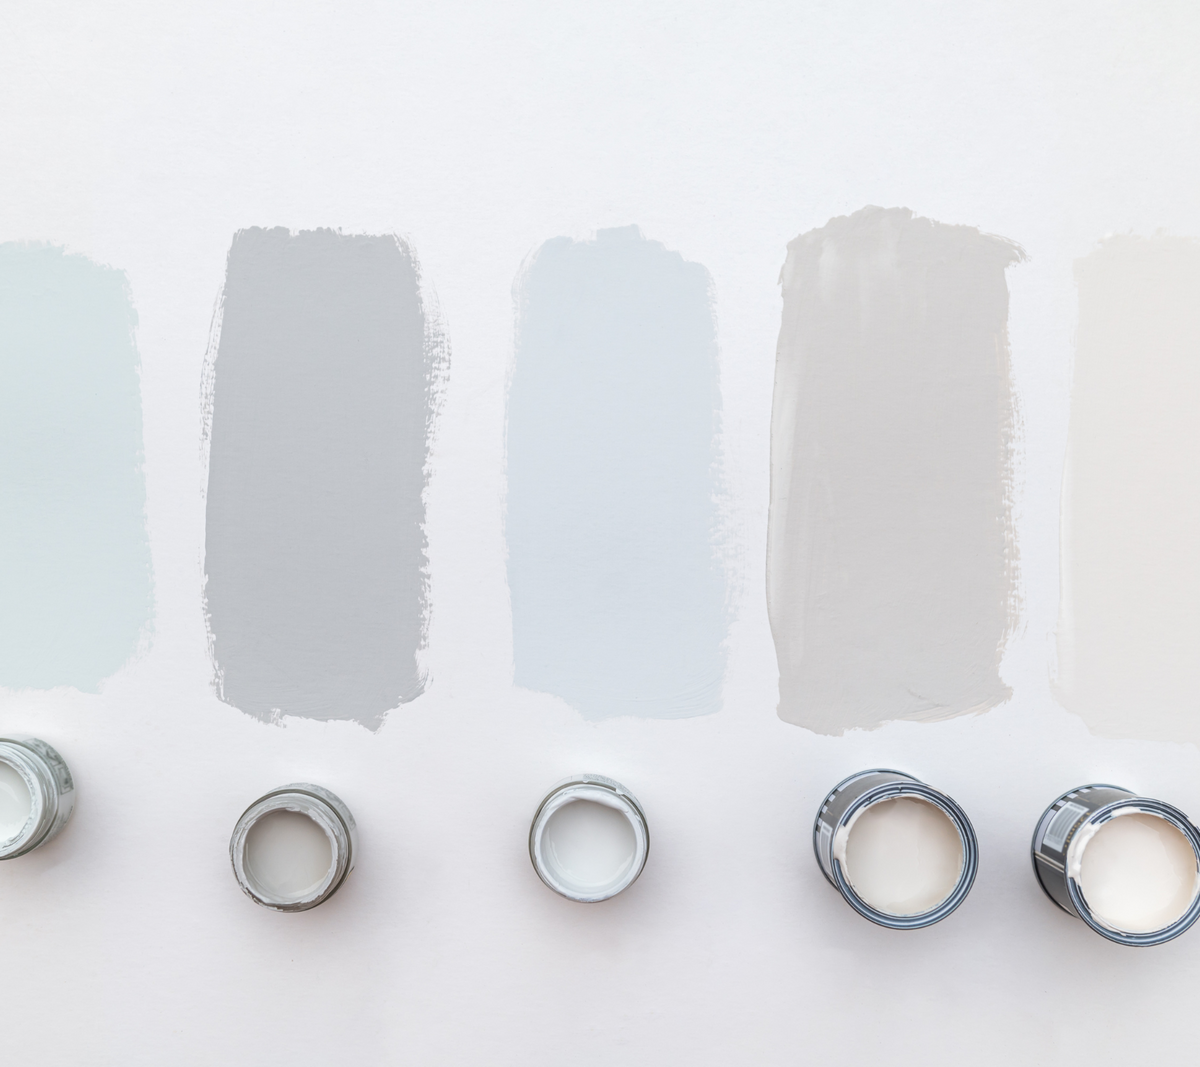 The Definitive Guide To Choosing The Right Gray Paint For Your Home